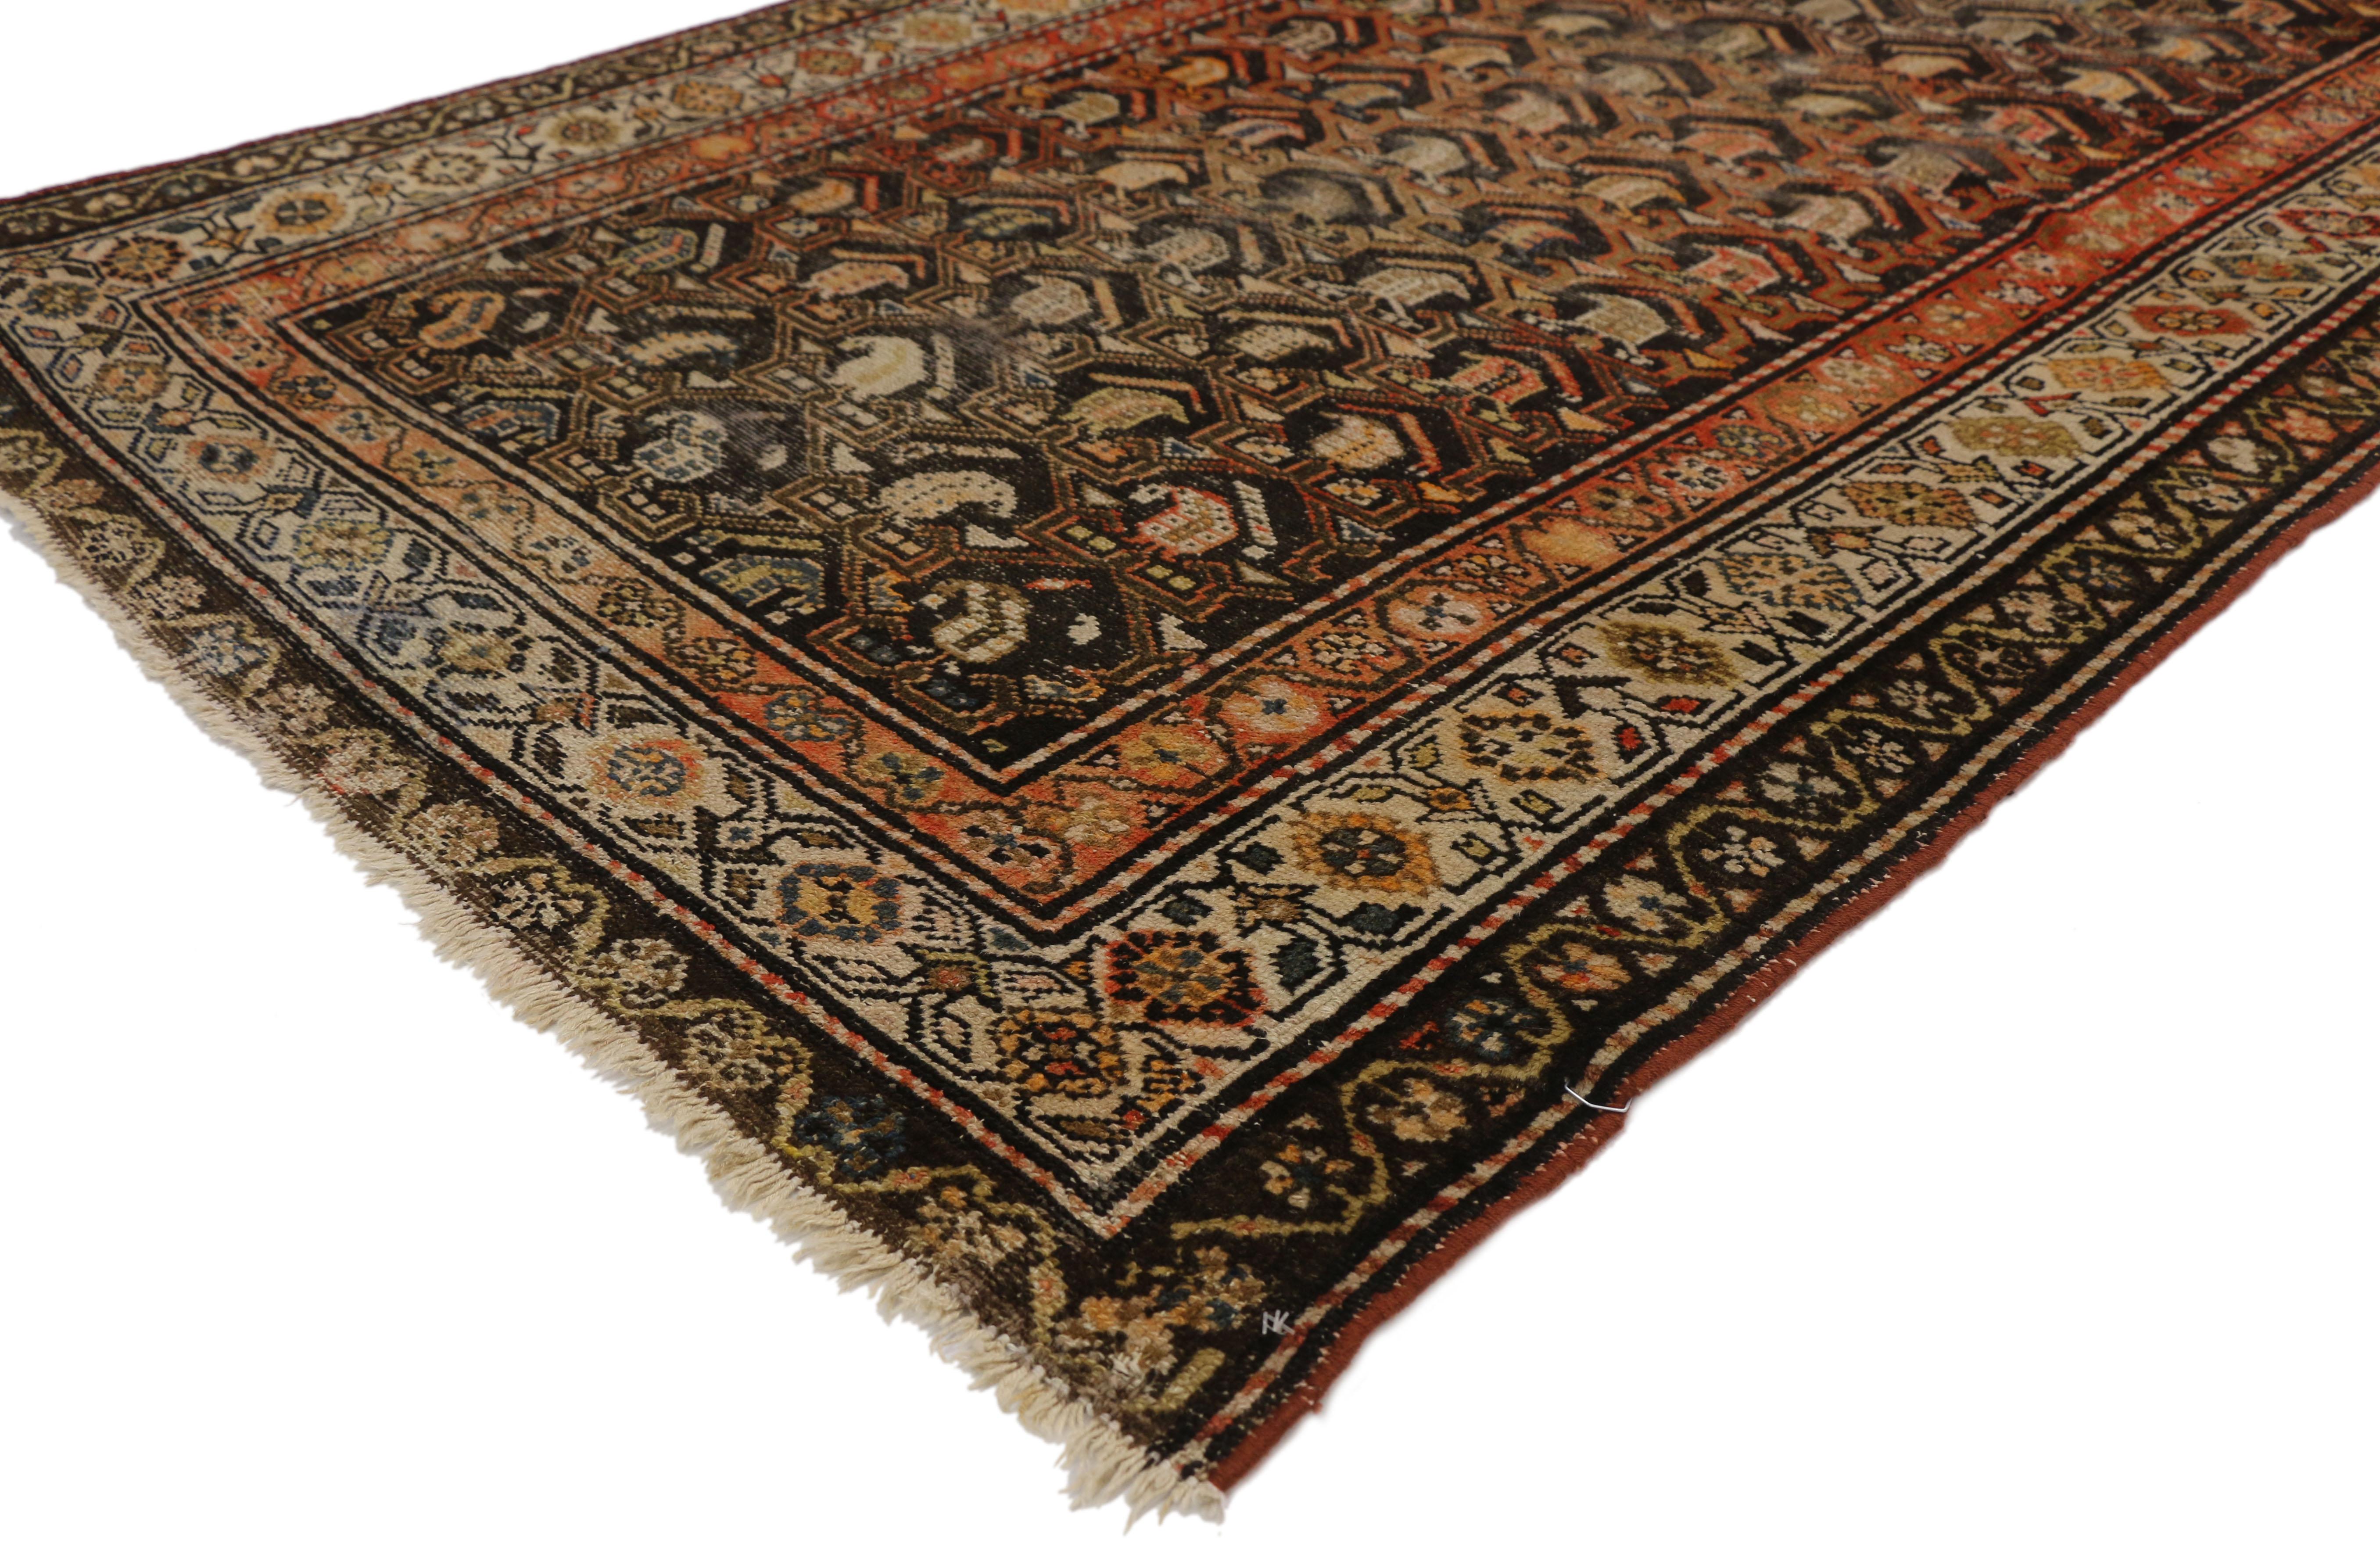 74029 Worn-In Distressed Antique Persian Malayer Rug with Adirondack Lodge Style 03'10 x 06'10. This hand knotted wool distressed antique Persian Malayer rug with rustic Adirondack style features an all-over repeating boteh motif design. The boteh